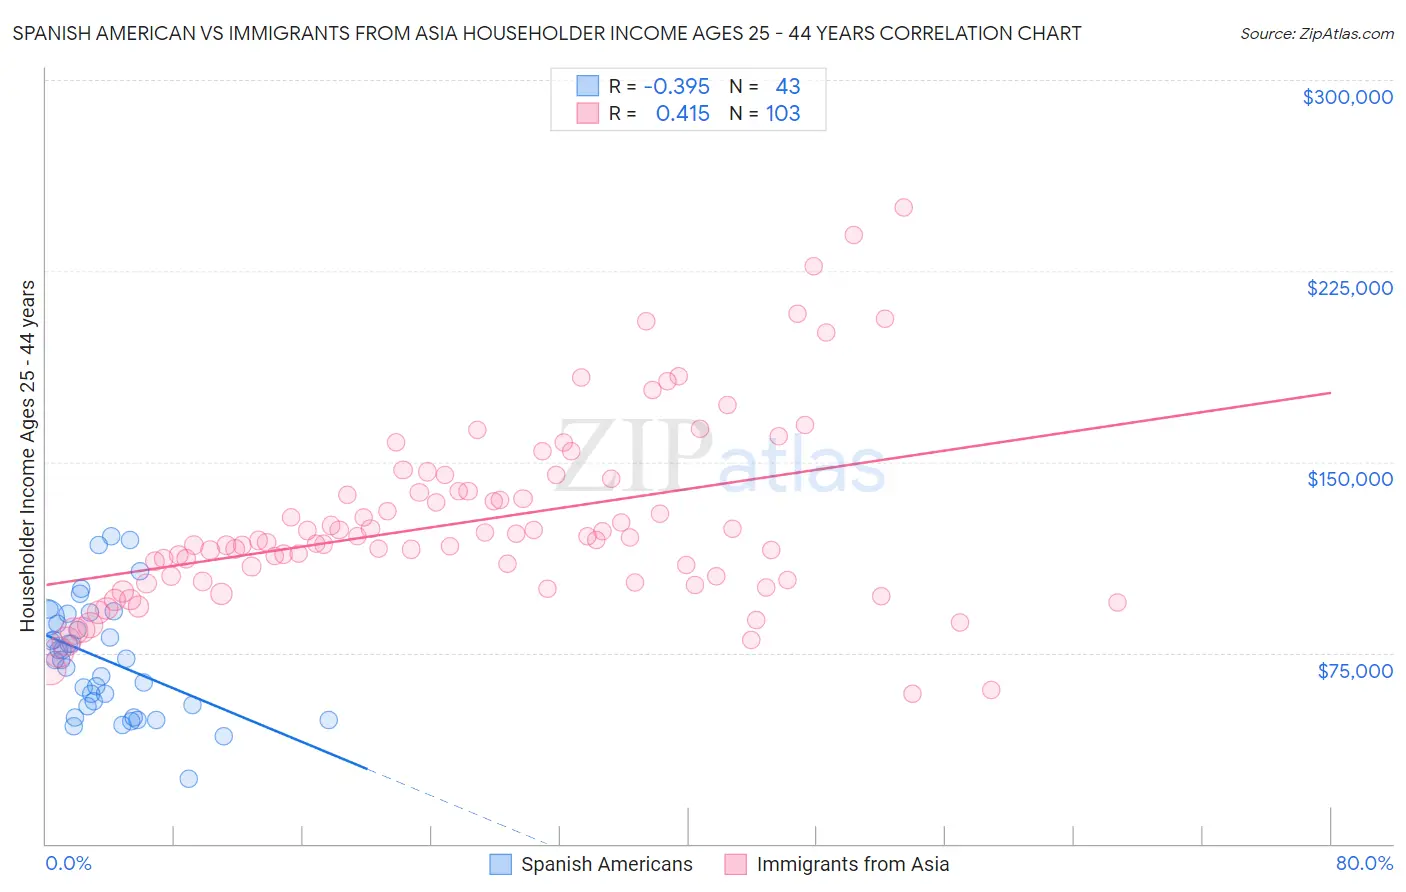 Spanish American vs Immigrants from Asia Householder Income Ages 25 - 44 years